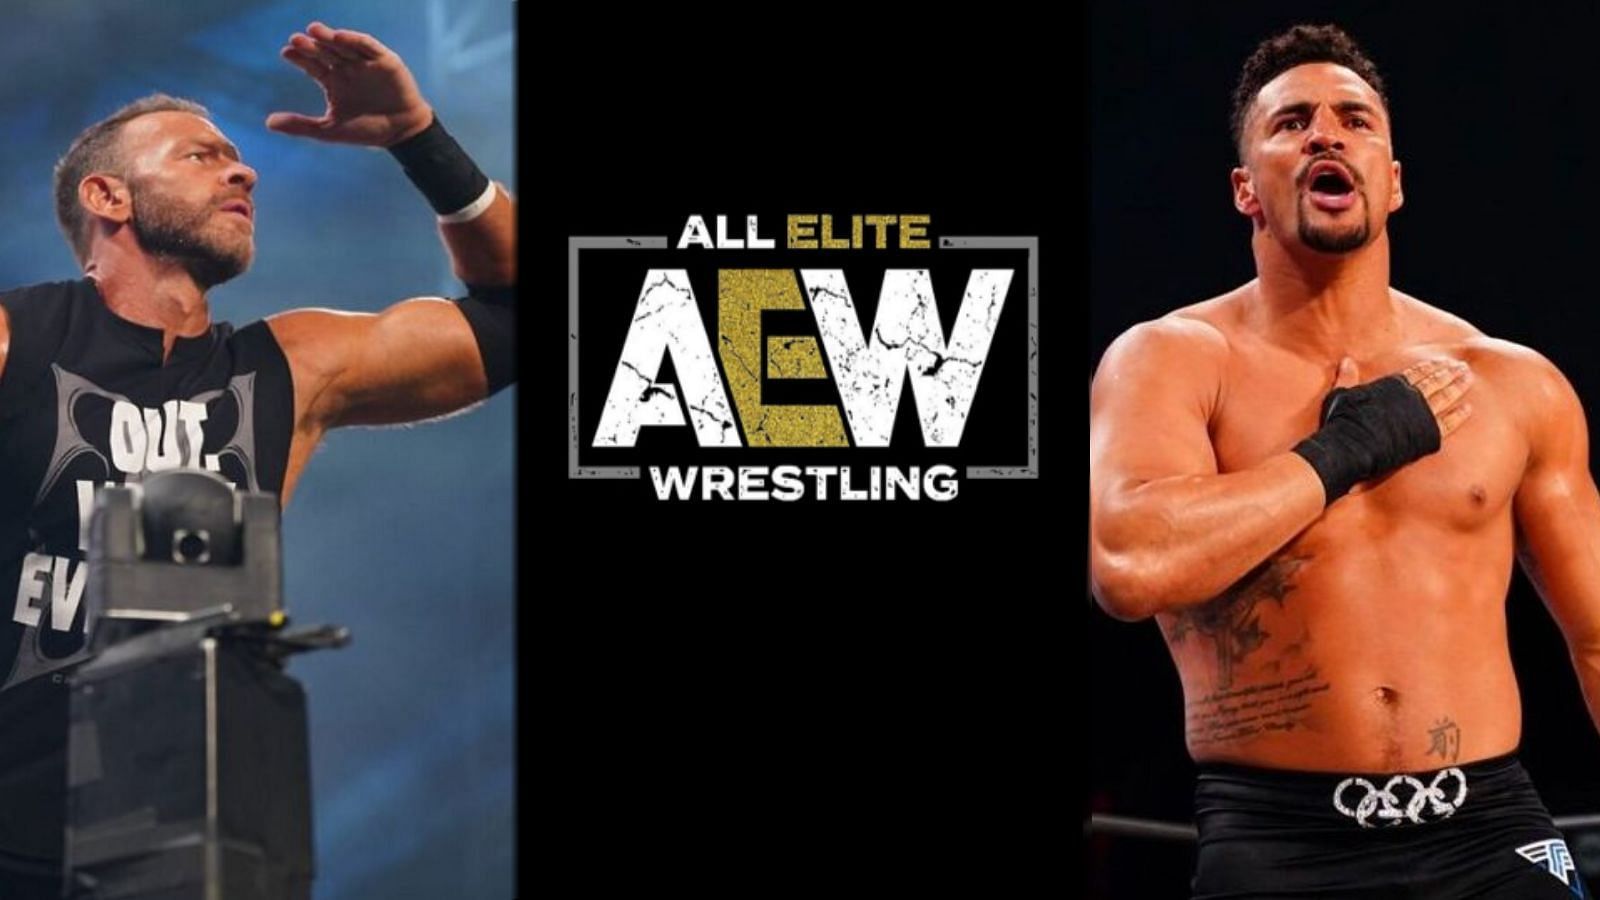 All Elite Wrestling has one of the most stacked roster in pro-wrestling